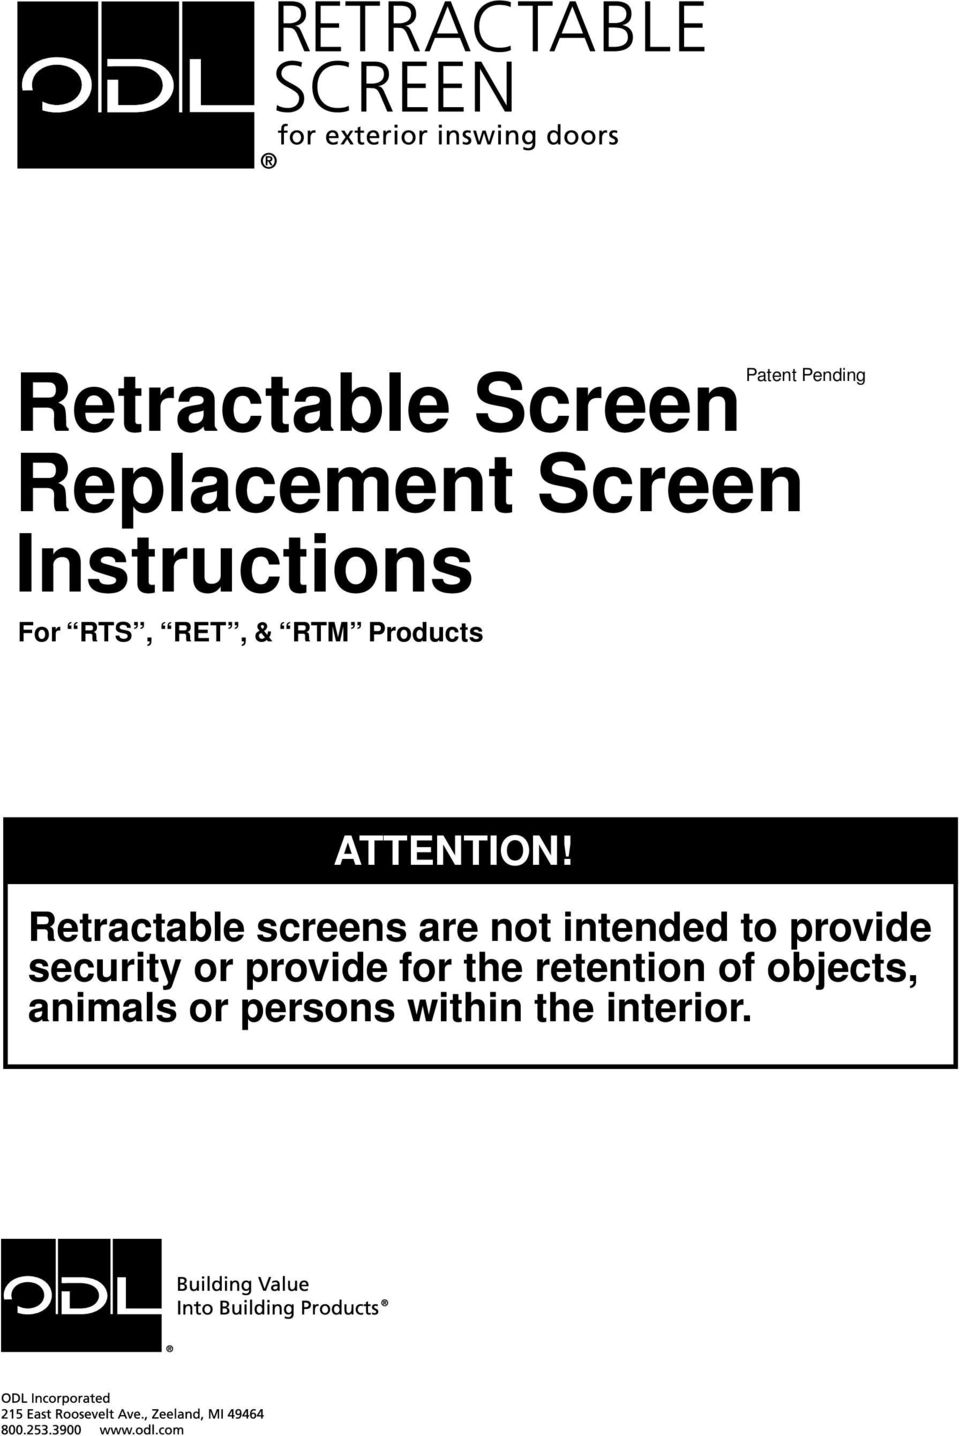 Retractable screens are not intended to provide security or